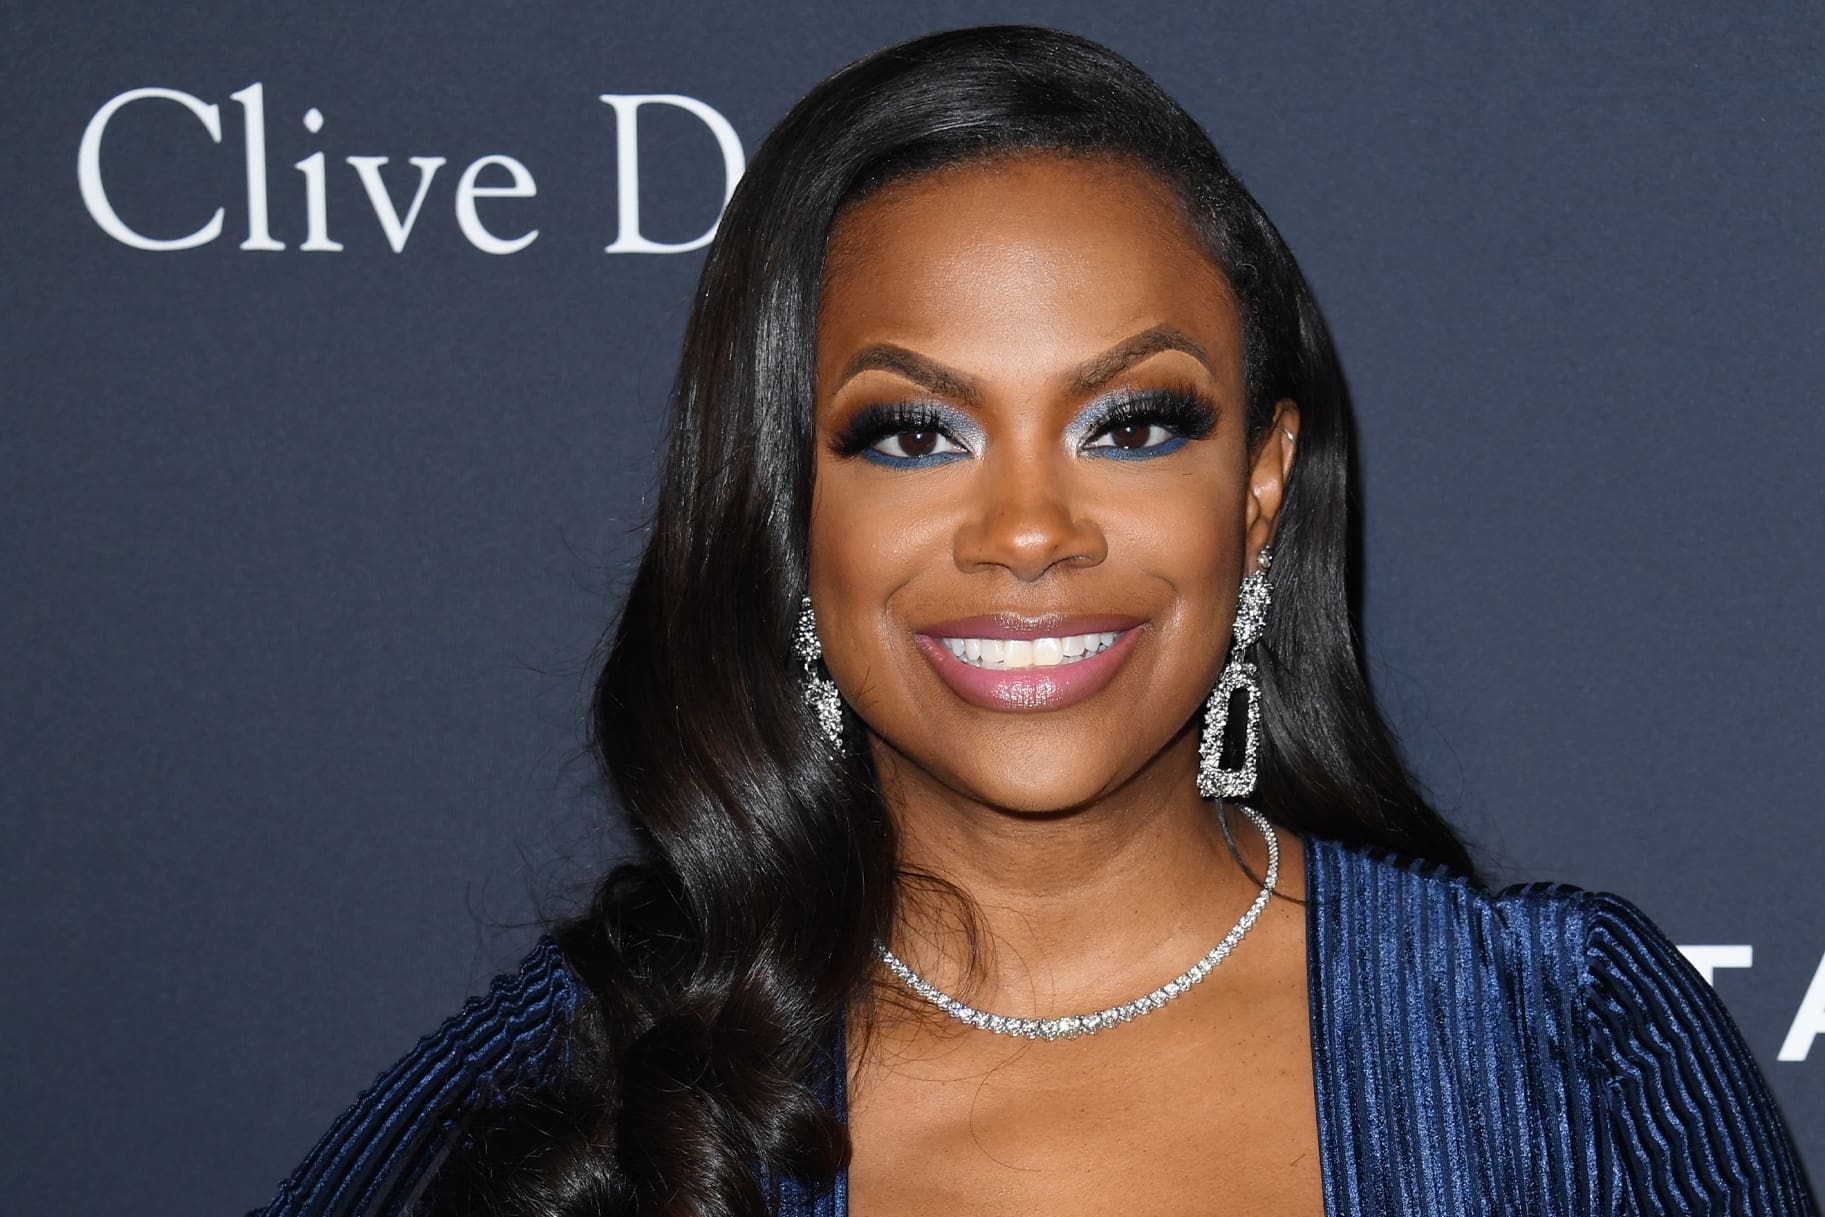 Kandi Burruss Shares A Gorgeous Look For Fans On Social Media - Check Her Out In This Blue Dress